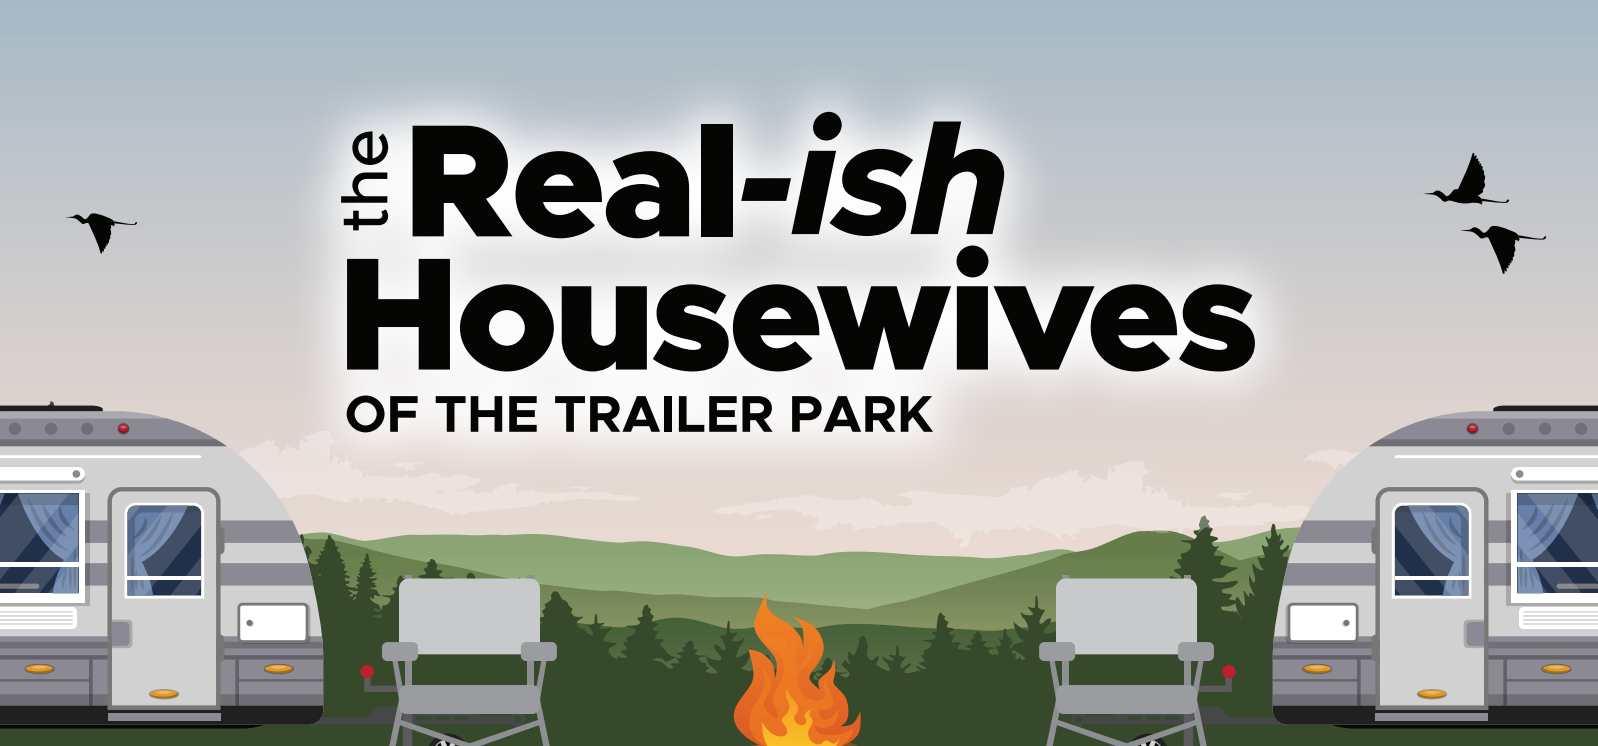 NEW RELEASE: The Real-ish Housewives of the Trailer Park